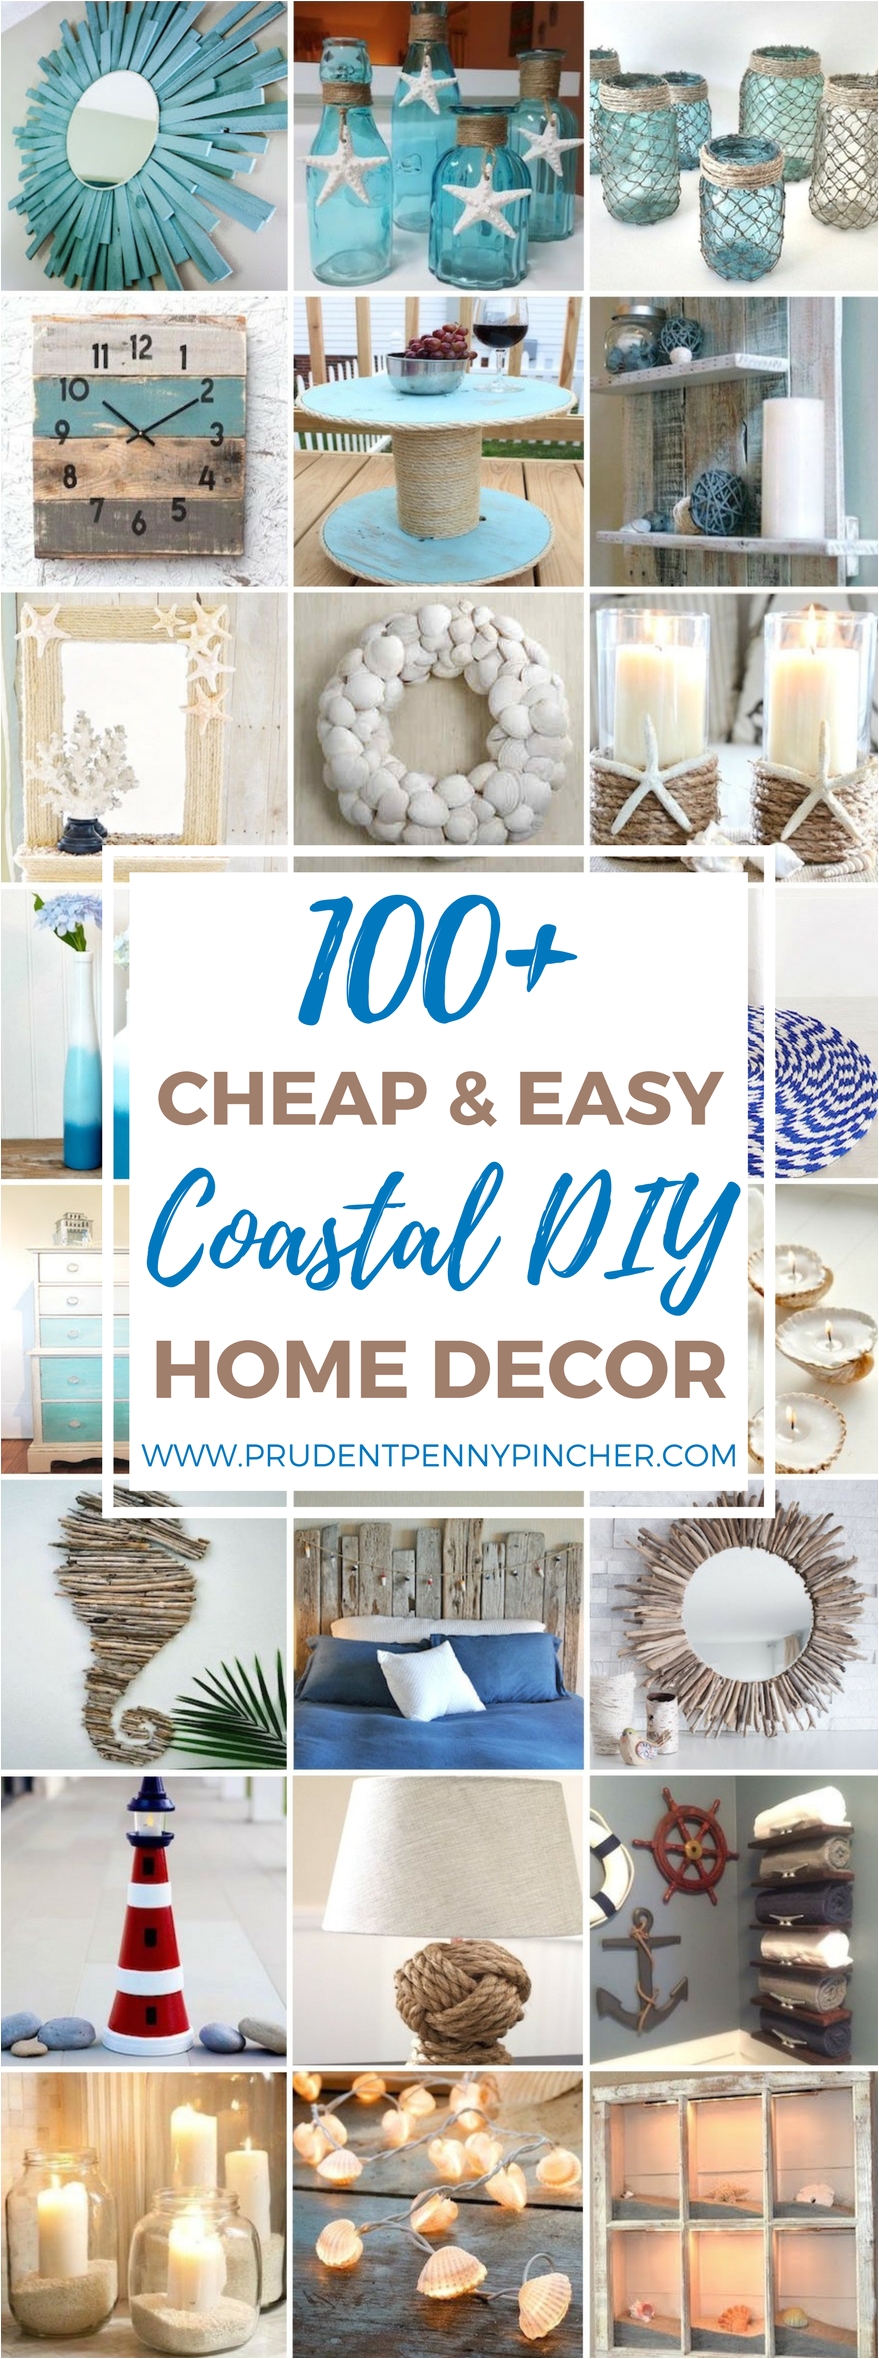 here is a round up of the best cheap and easy coastal diy home decor projects on the internet so that you can bring some of the beach to your home